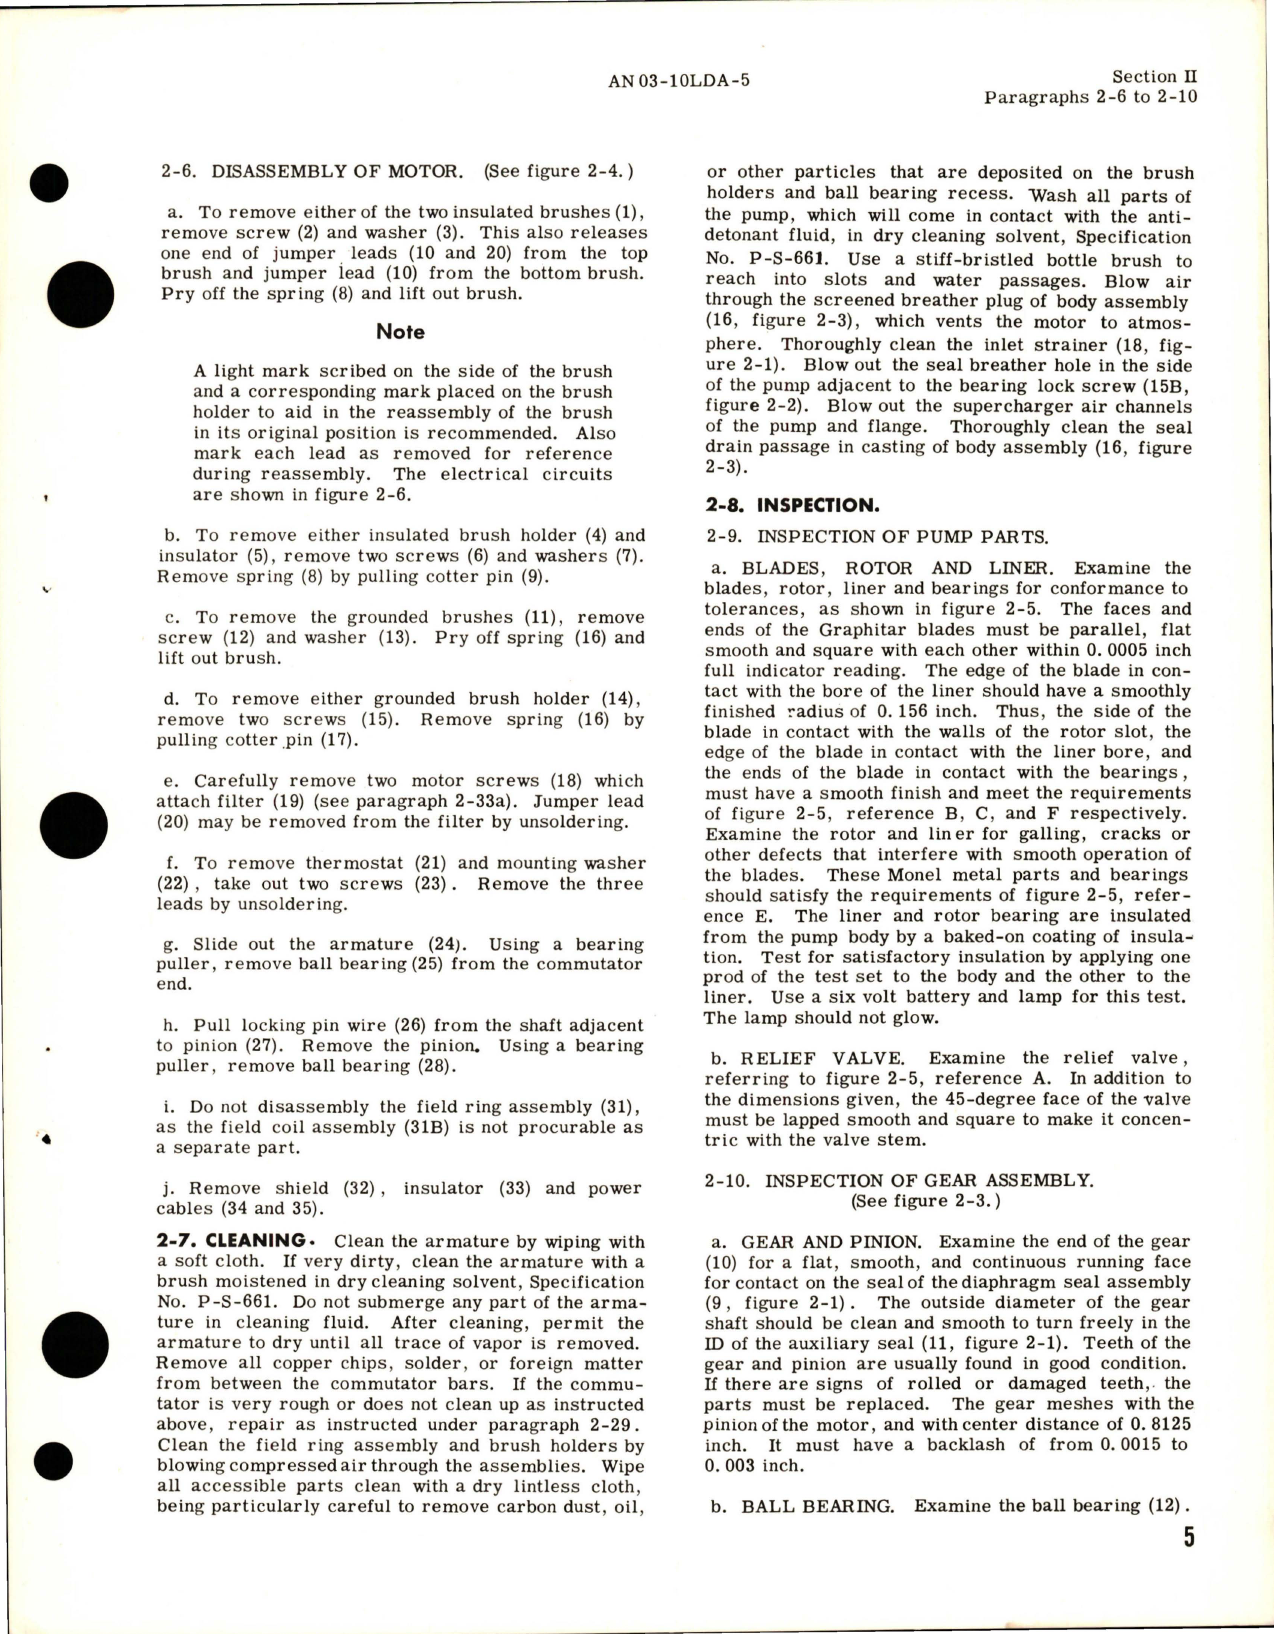 Sample page 9 from AirCorps Library document: Overhaul Instructions for Fully Submerged Type Water Injection Pumps - RD-8500 Series